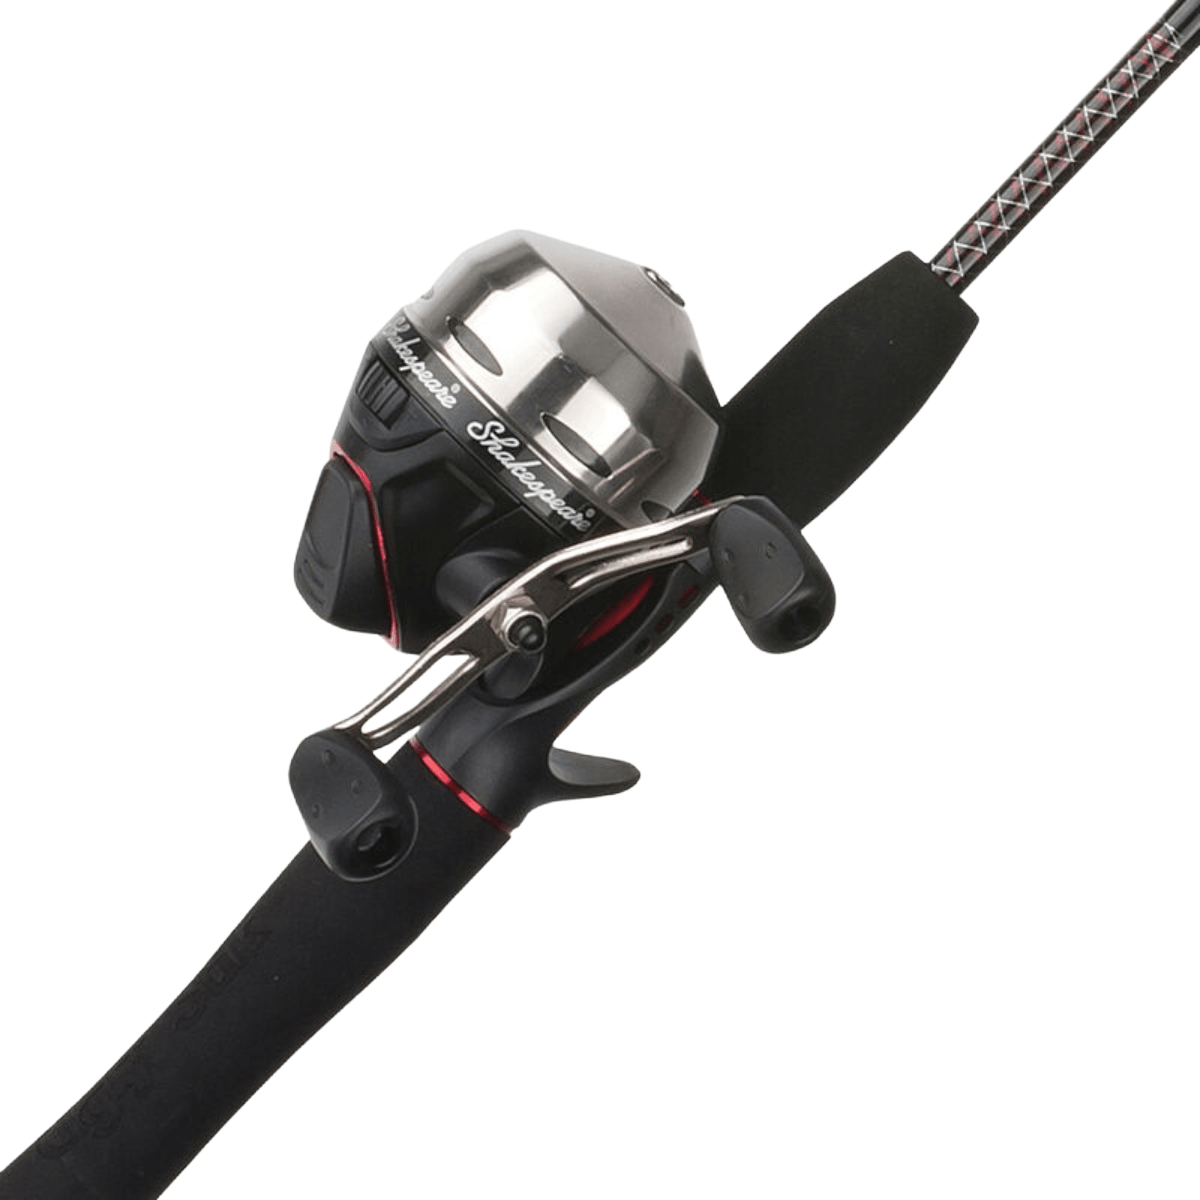 Shakespeare Ugly Stik Gx2 Spincast Rod And Reel Fishing Combo - Als.com